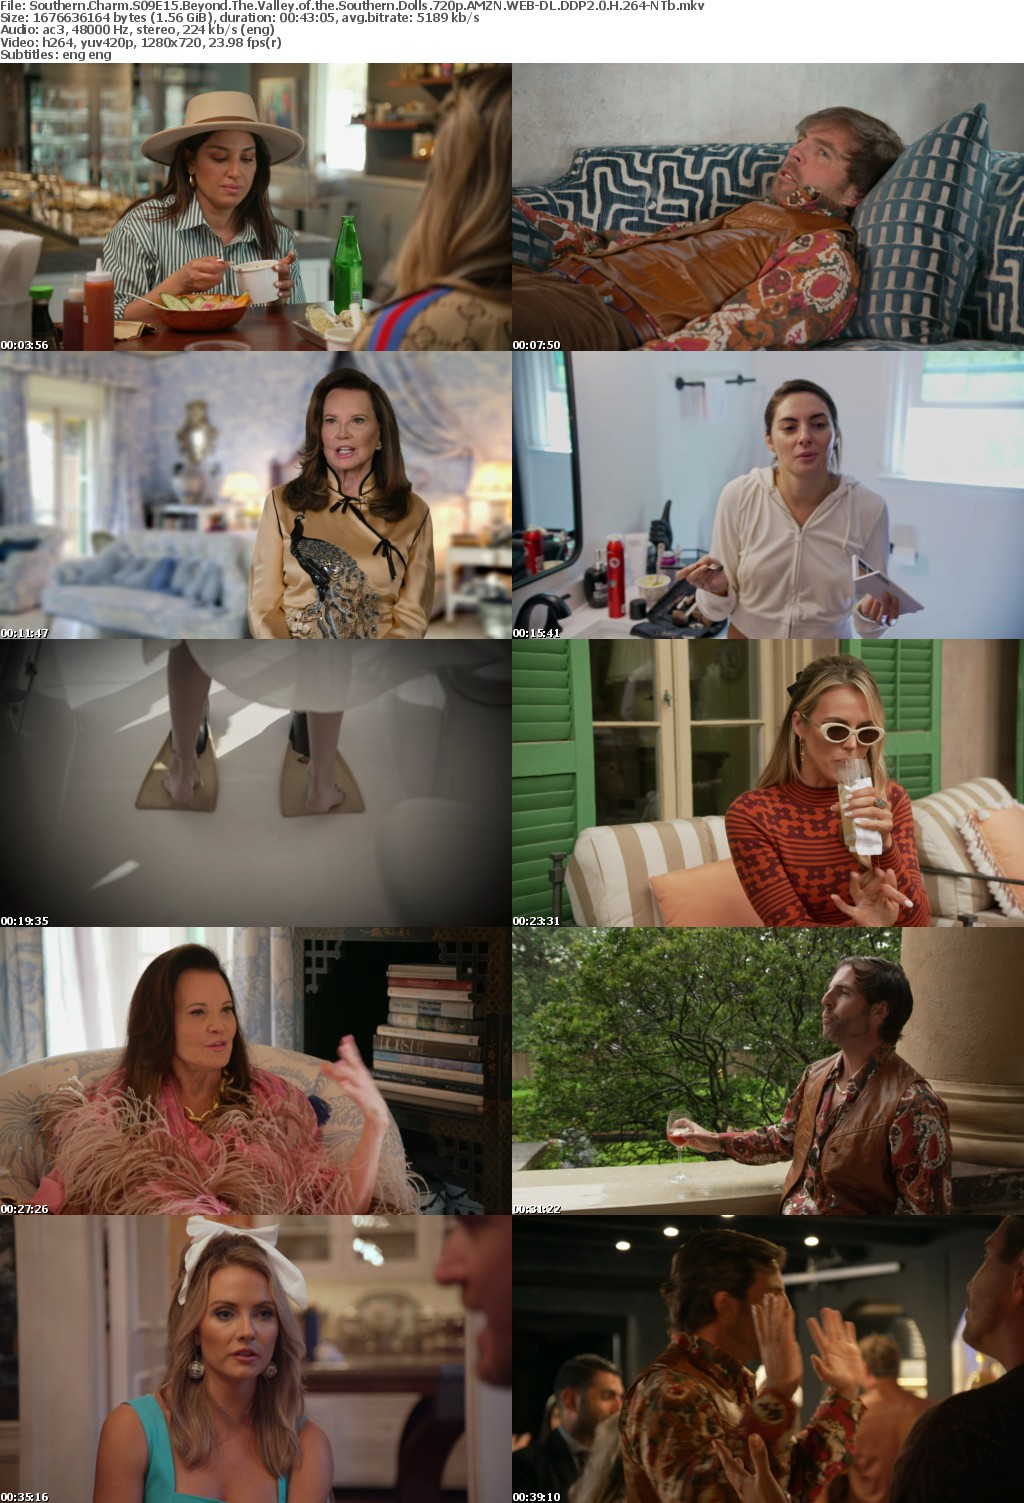 Southern Charm S09E15 Beyond The Valley of the Southern Dolls 720p AMZN WEB-DL DDP2 0 H 264-NTb